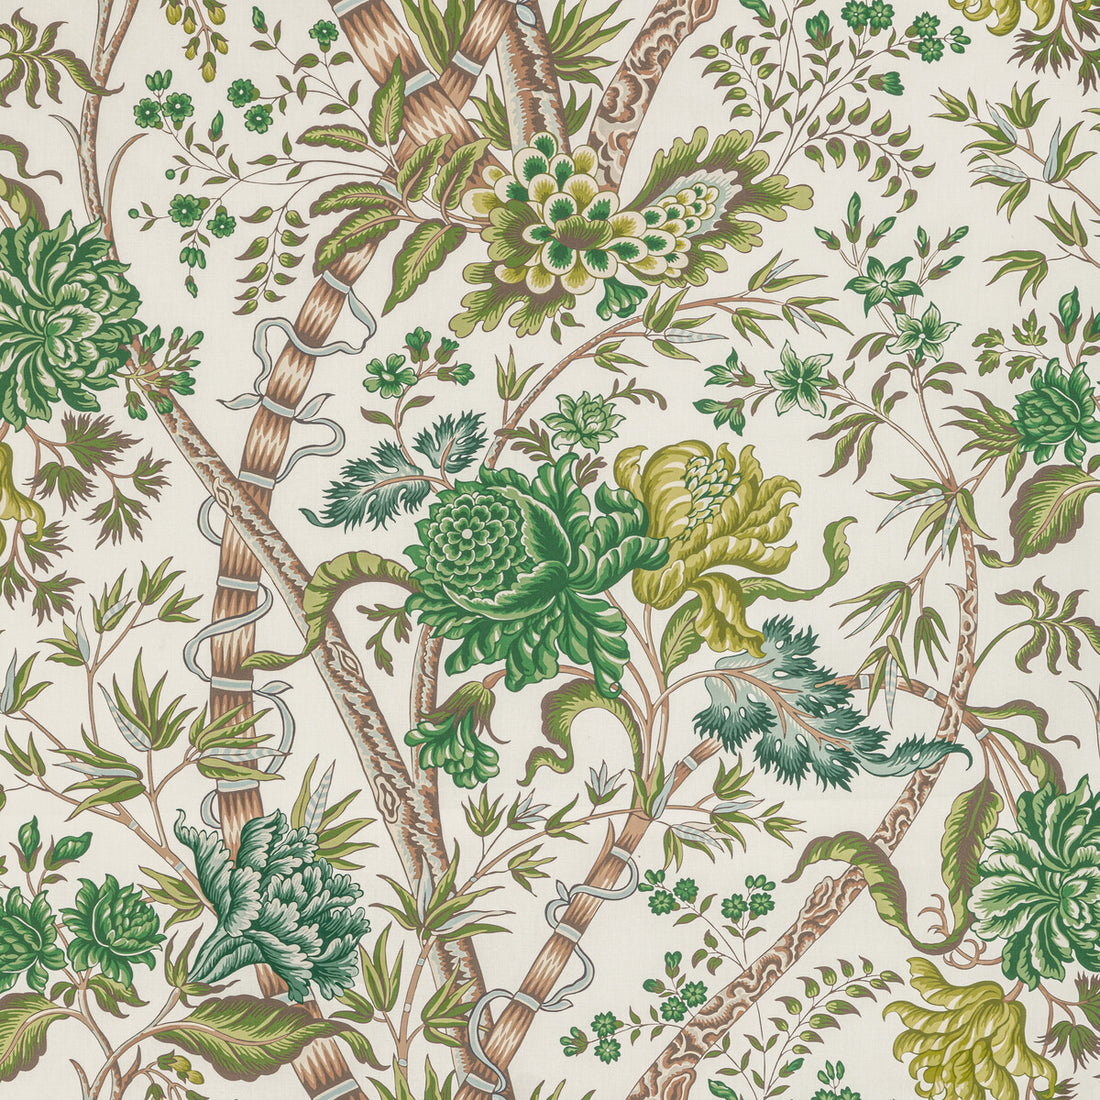 Luberon Print fabric in green/leaf color - pattern 8022100.333.0 - by Brunschwig &amp; Fils in the Manoir collection